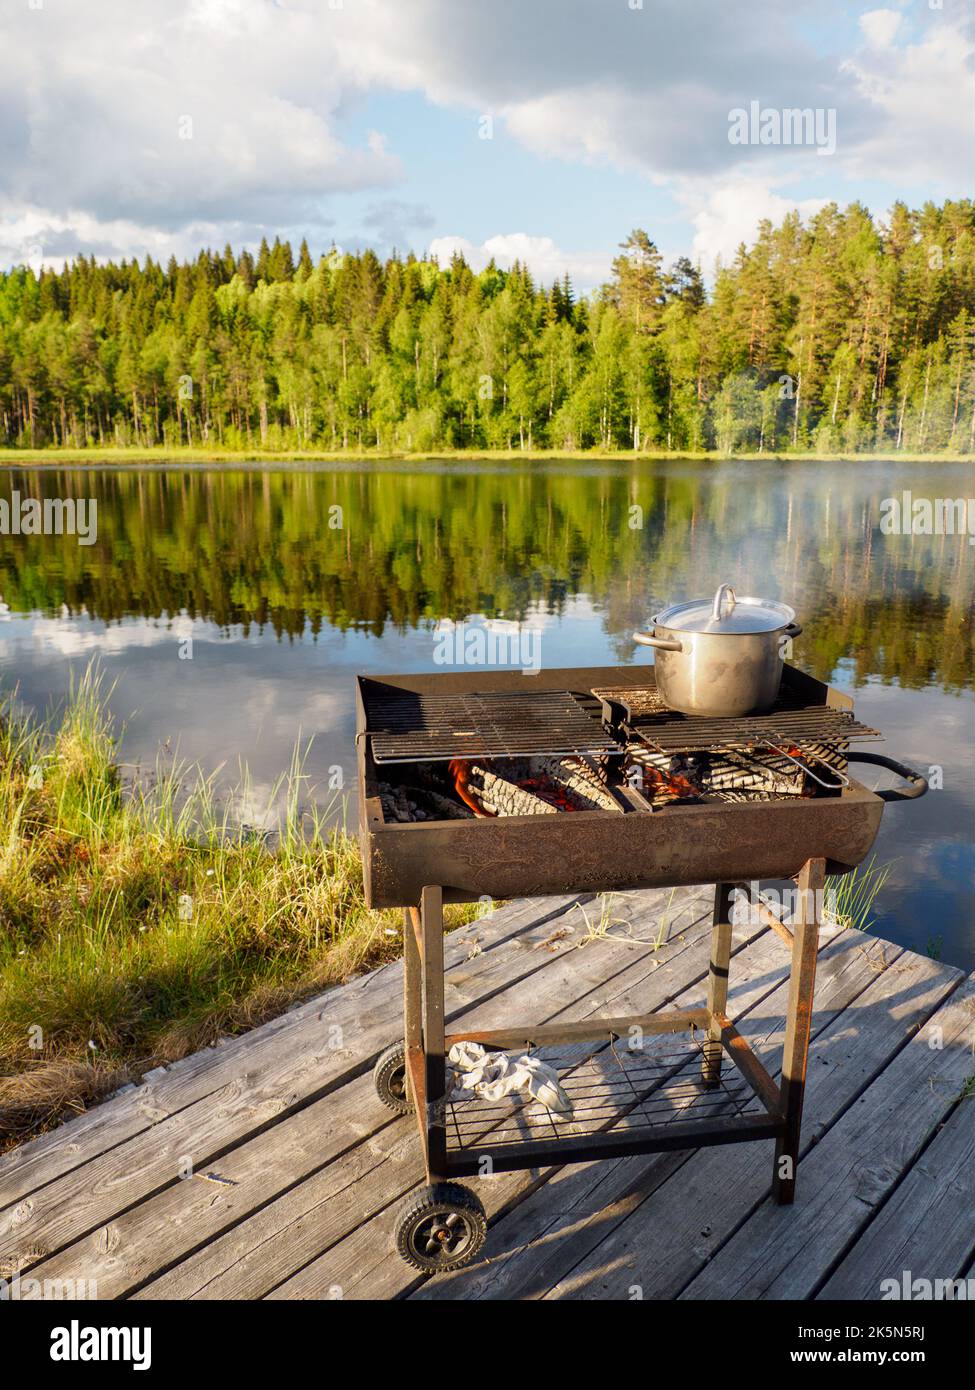 Party time. Grilling on the shores of the lake. Idyllic Swedish landscape in summer. Sweden. Northern Europe. Stock Photo